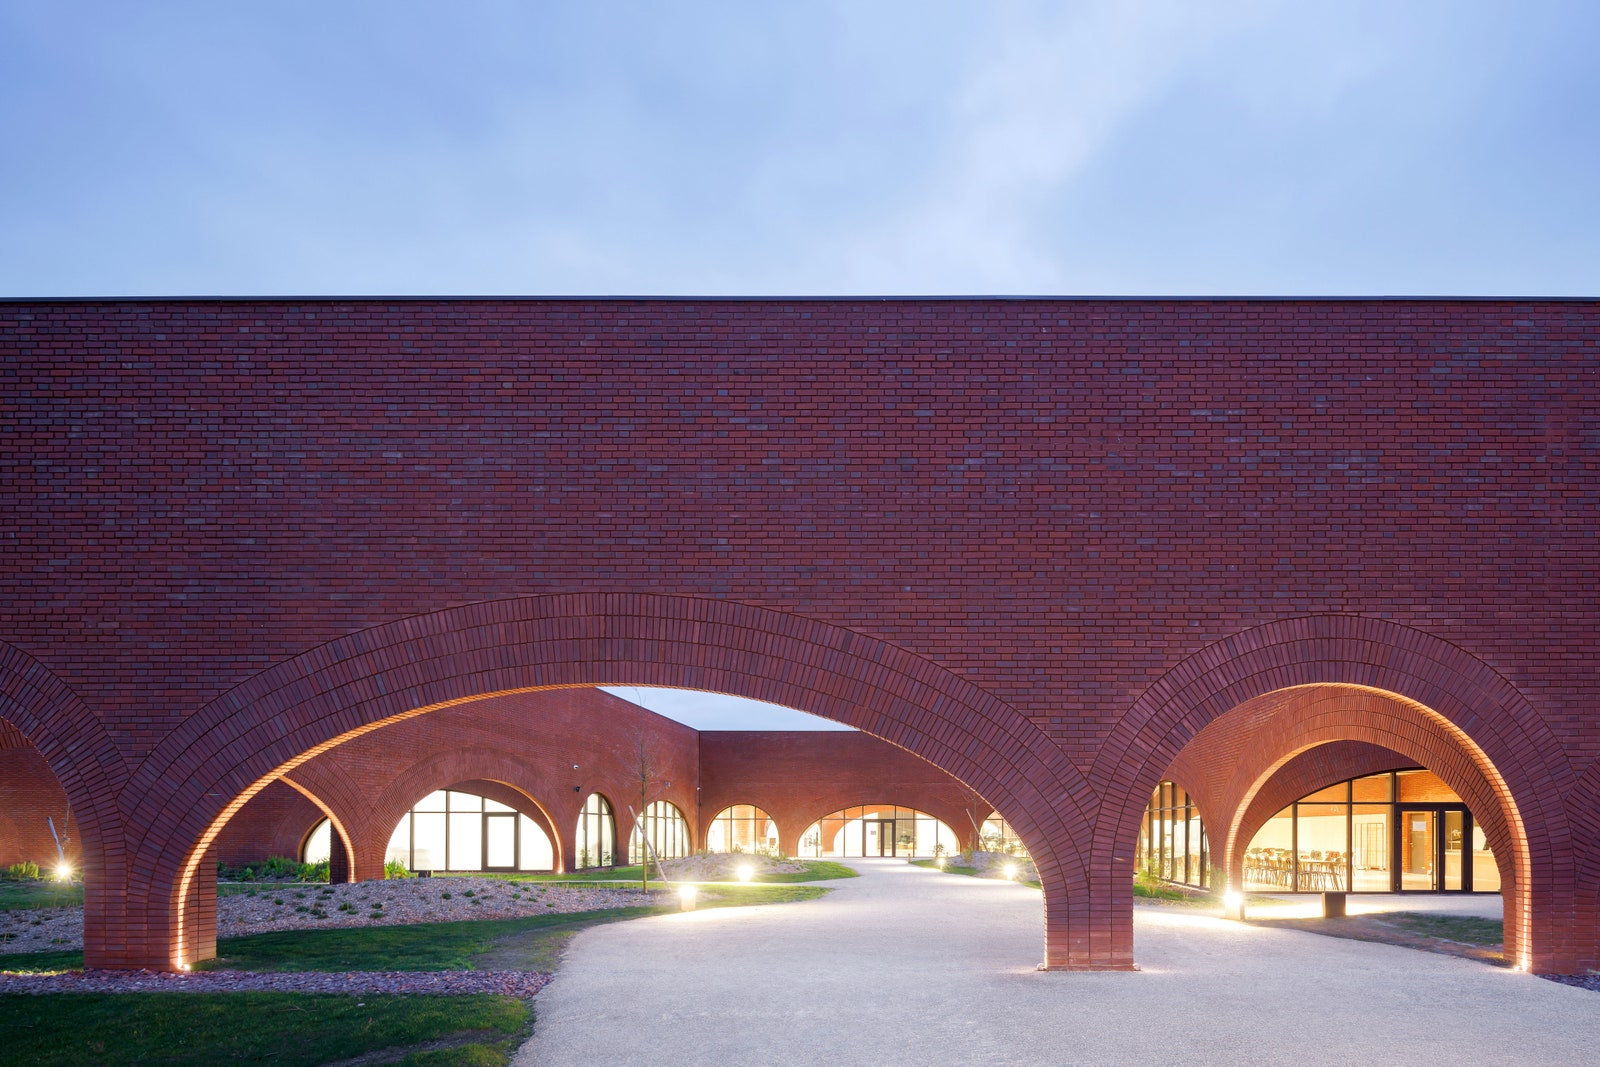 In Normandy Hermèss new Maroquinerie de Louviers features arches of locally made brick.